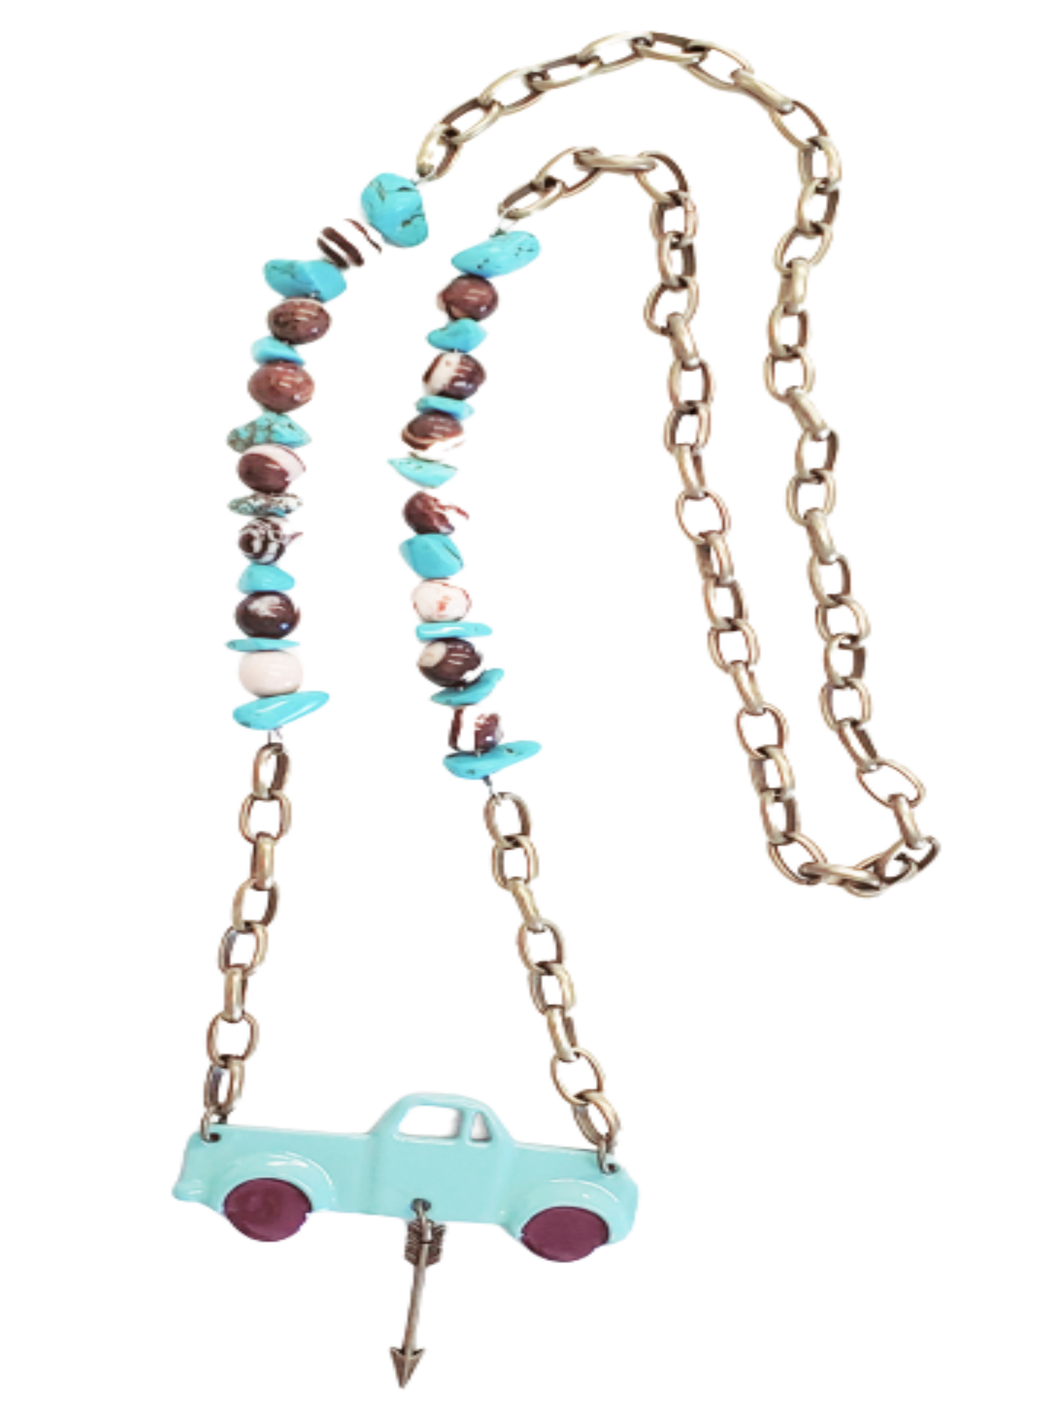 Turquoise Retro Truck - Chain Necklace